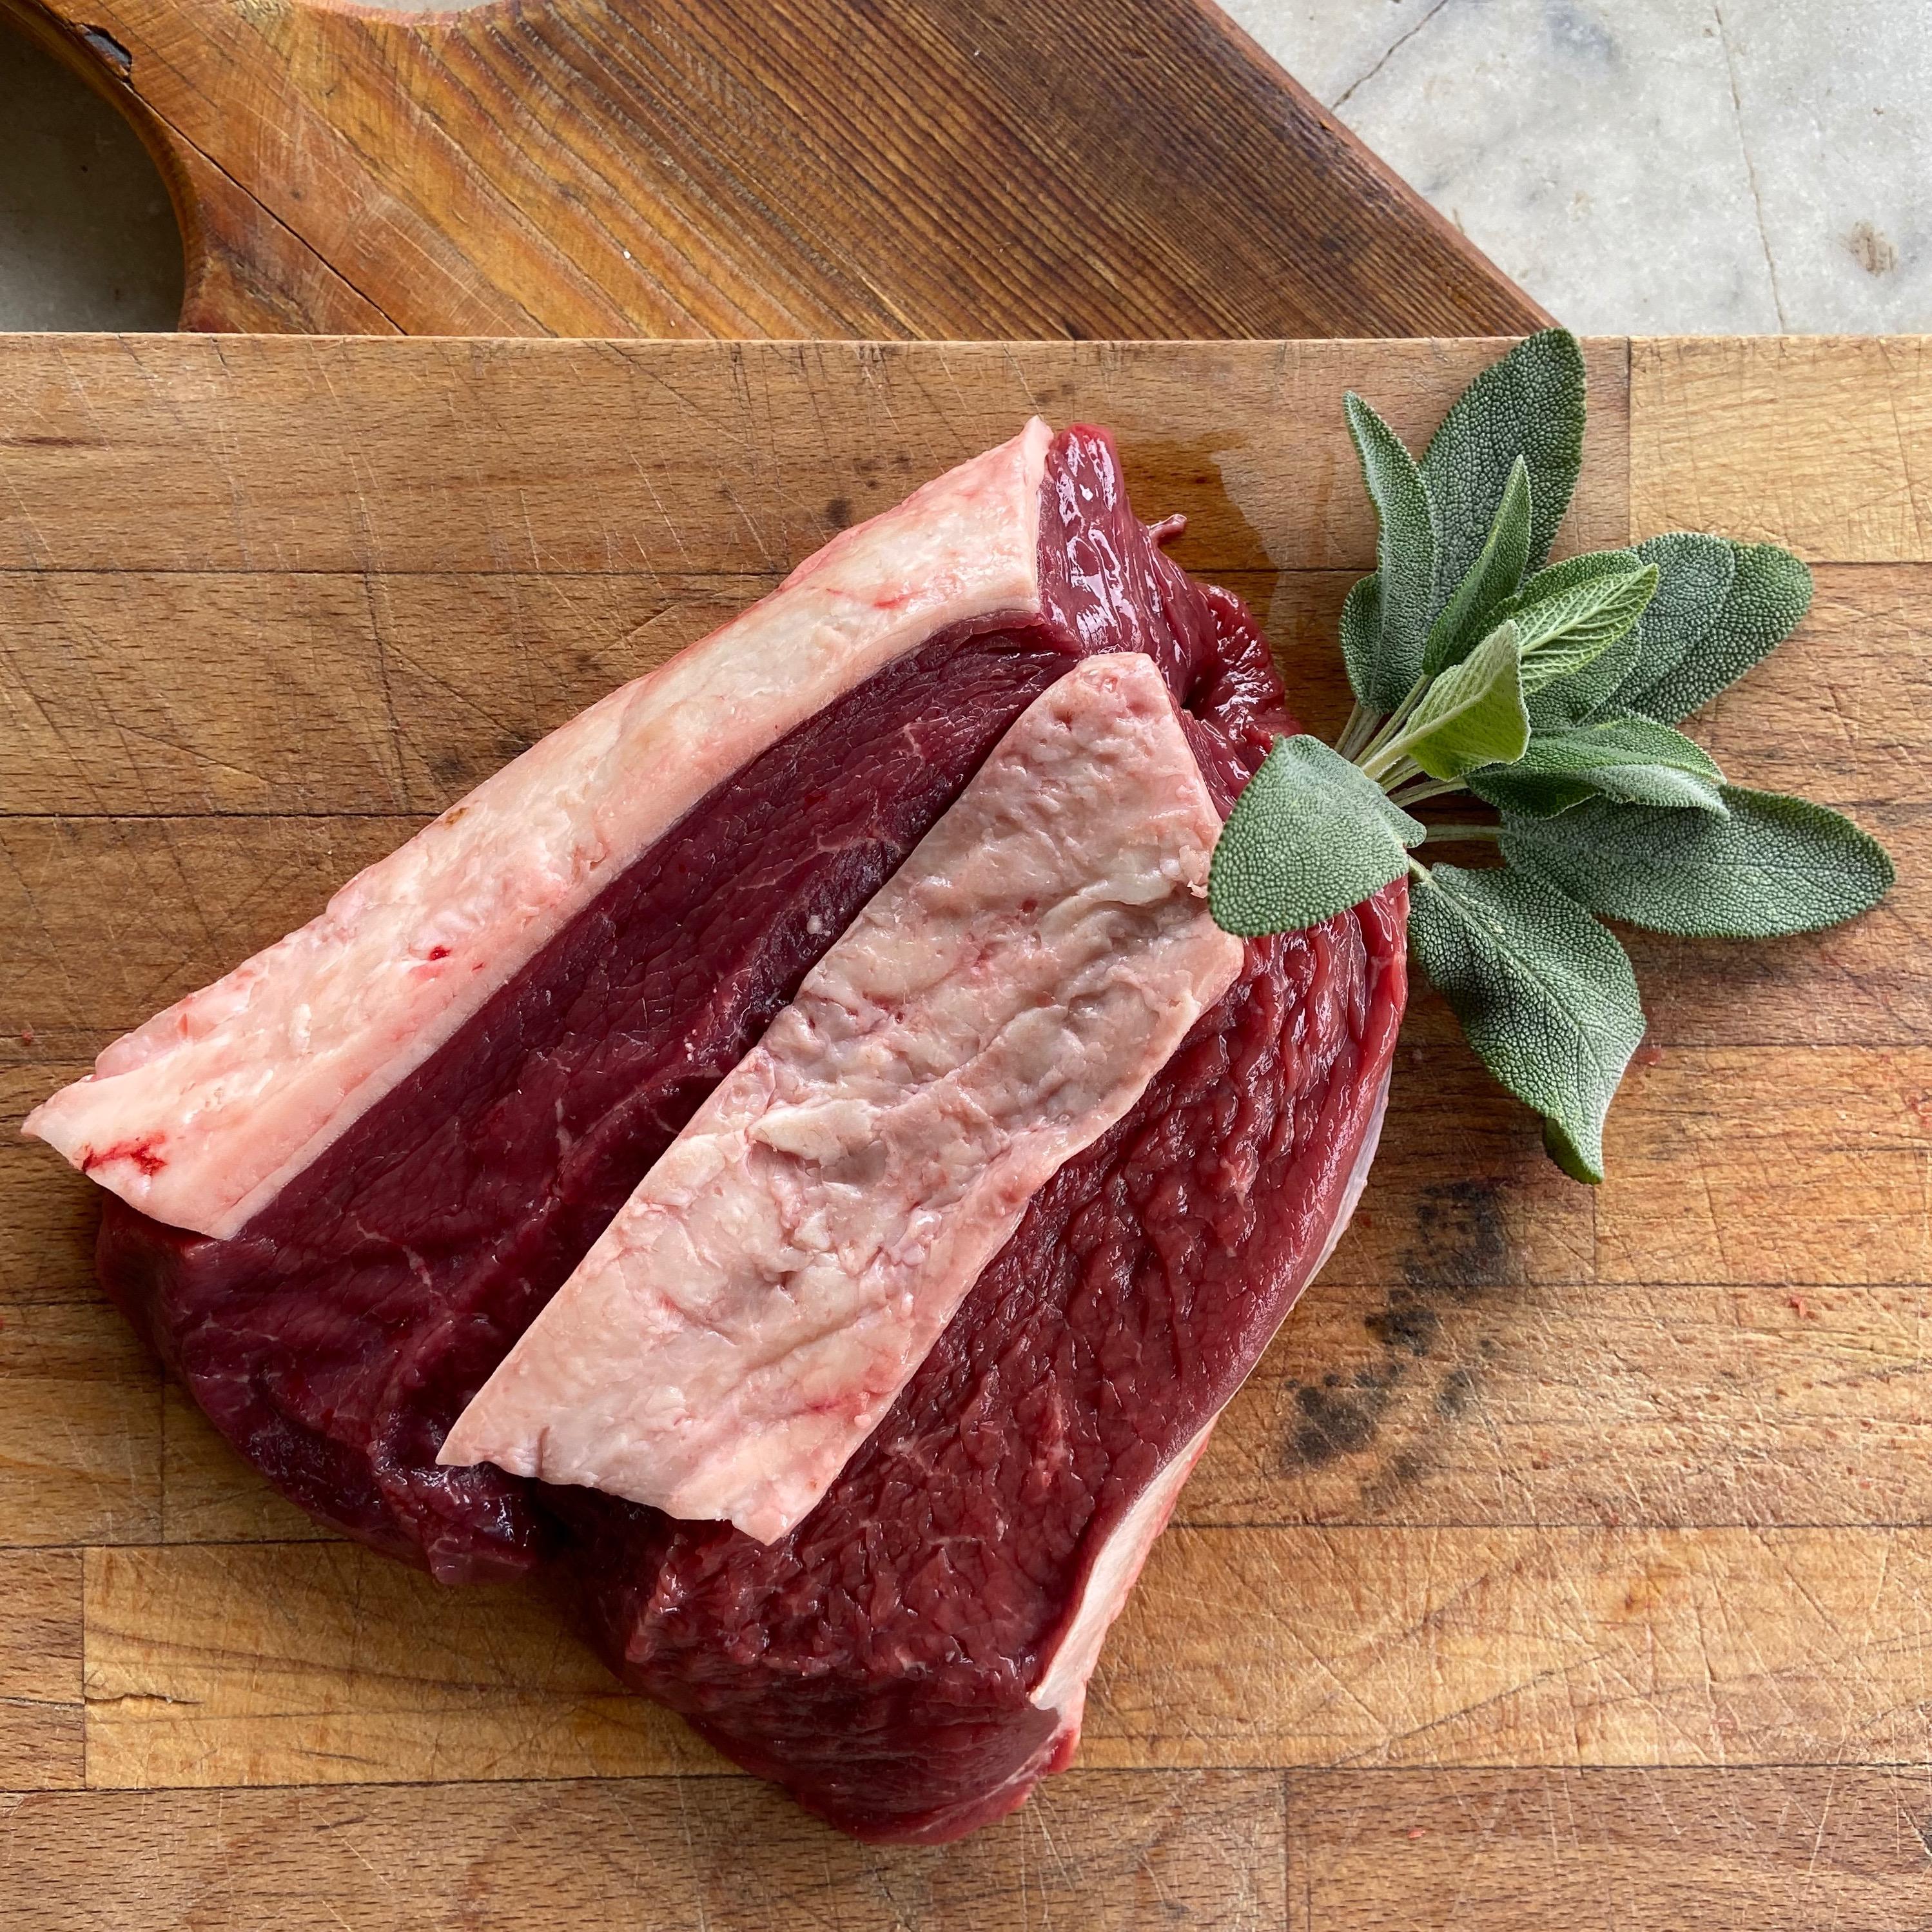 100% grass fed picanha steaks, made from Longhorn beef